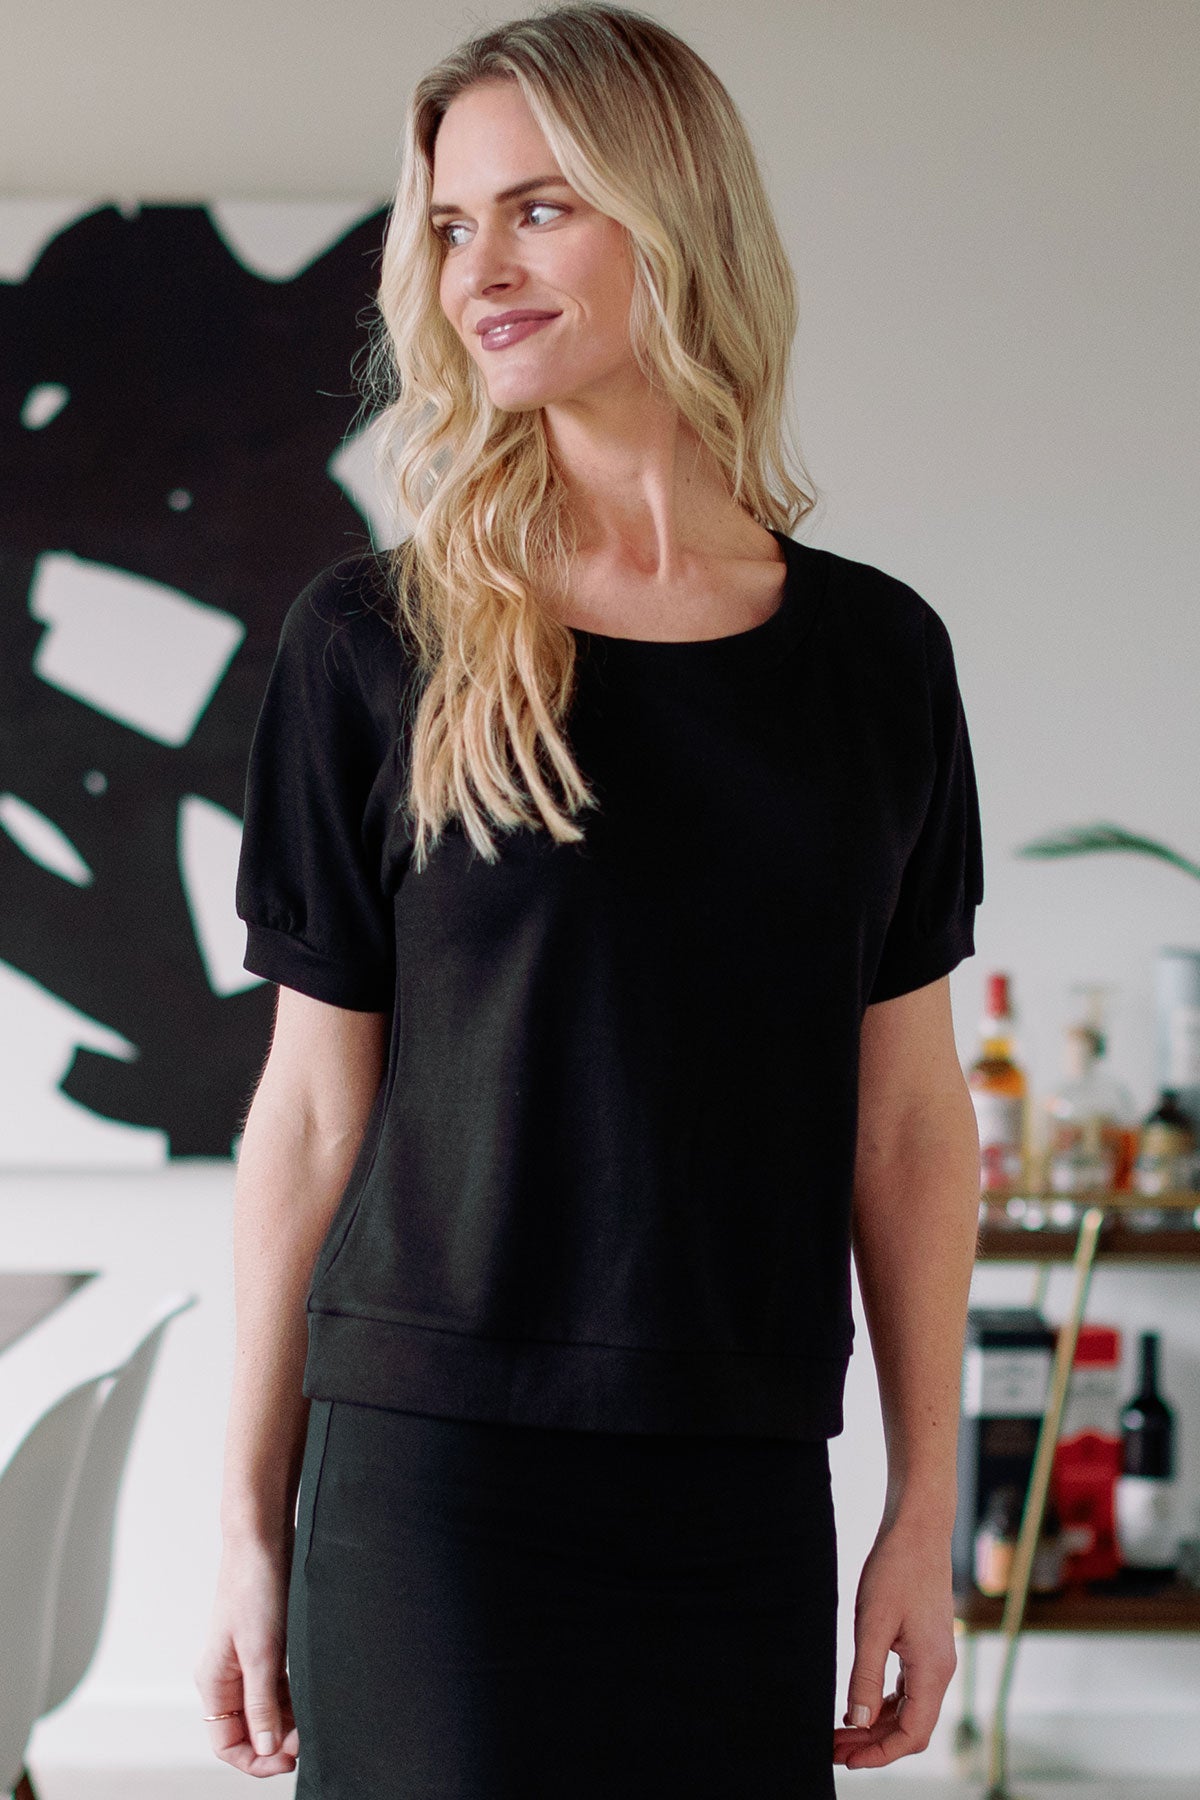 A woman standing and smiling while looking to the side, wearing Yala Berkeley Puff Short Sleeve Bamboo and Organic Cotton Raglan Sweatshirt Top in Black